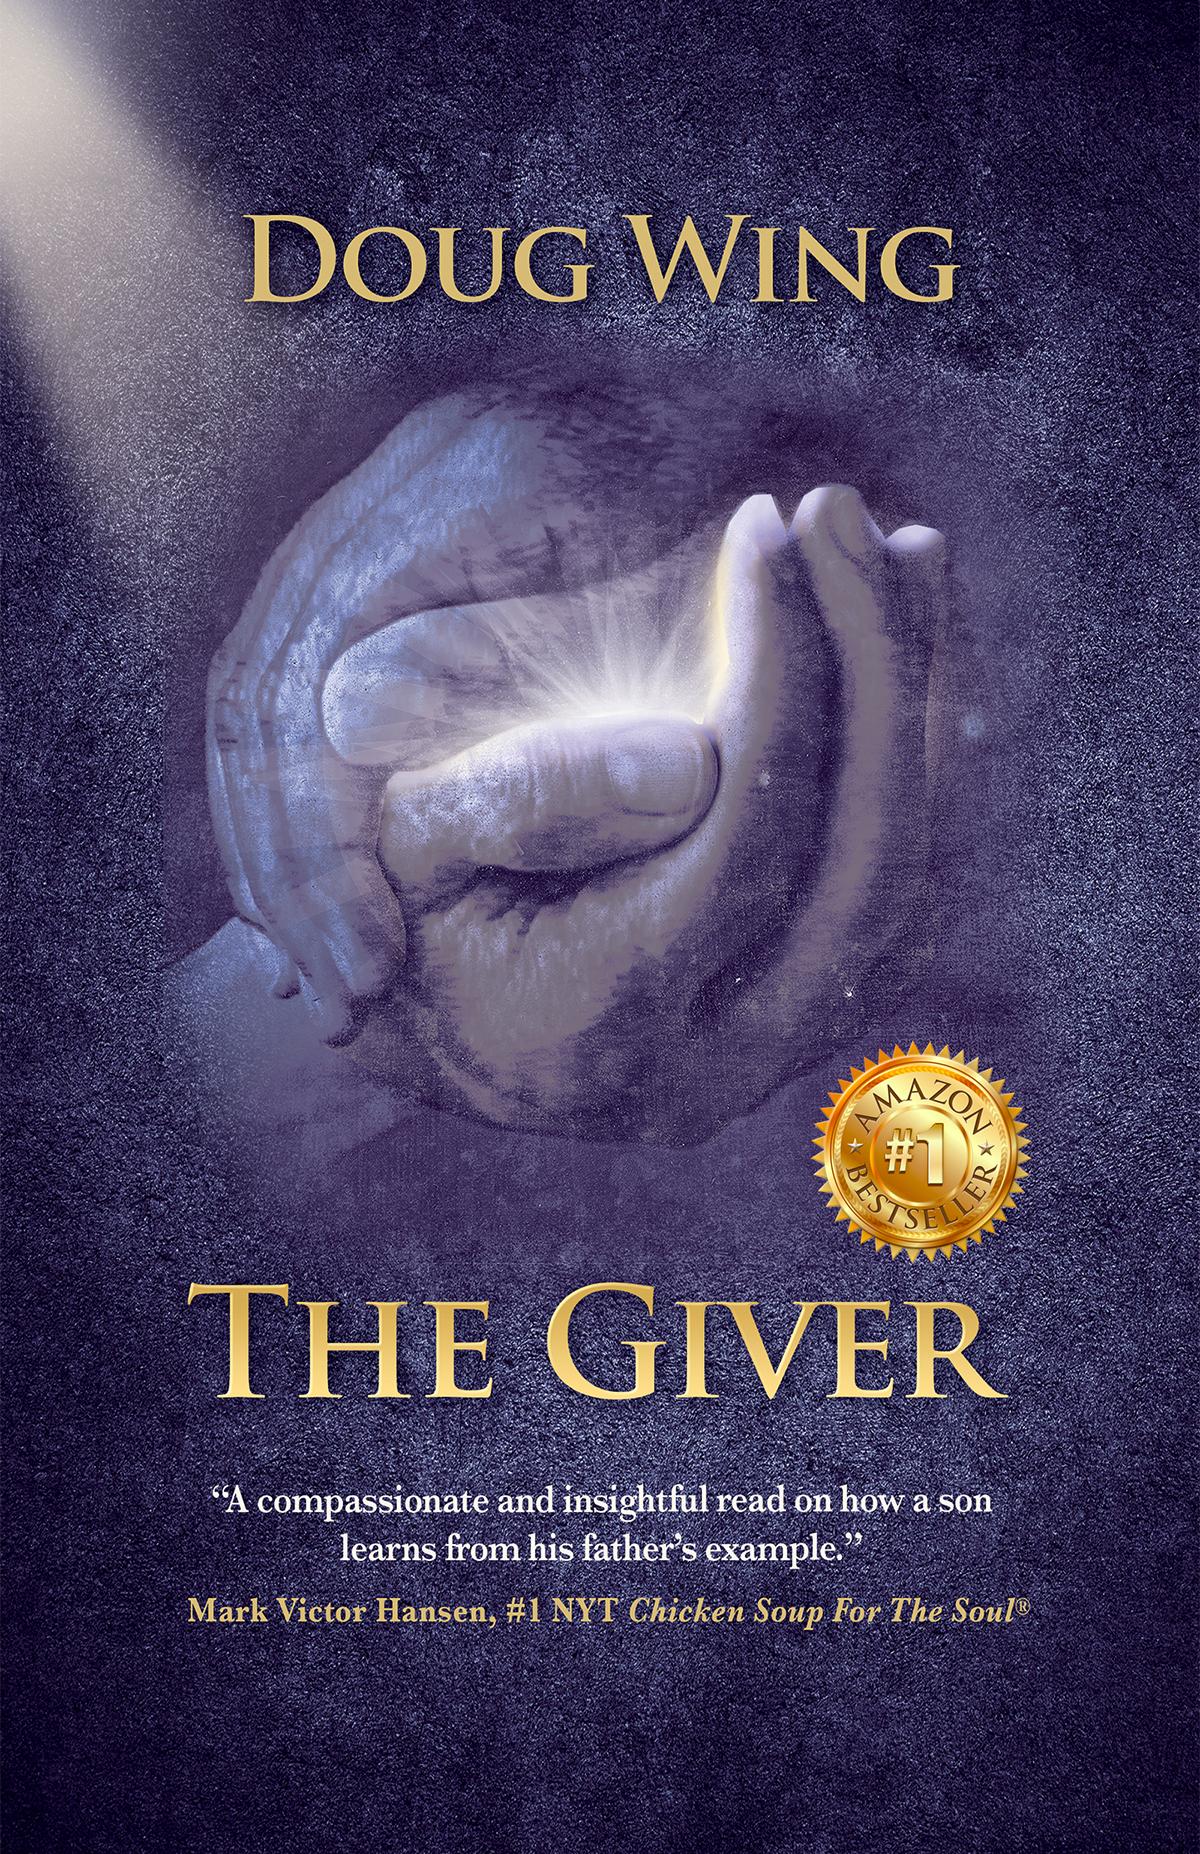 The Giver by Doug Wing